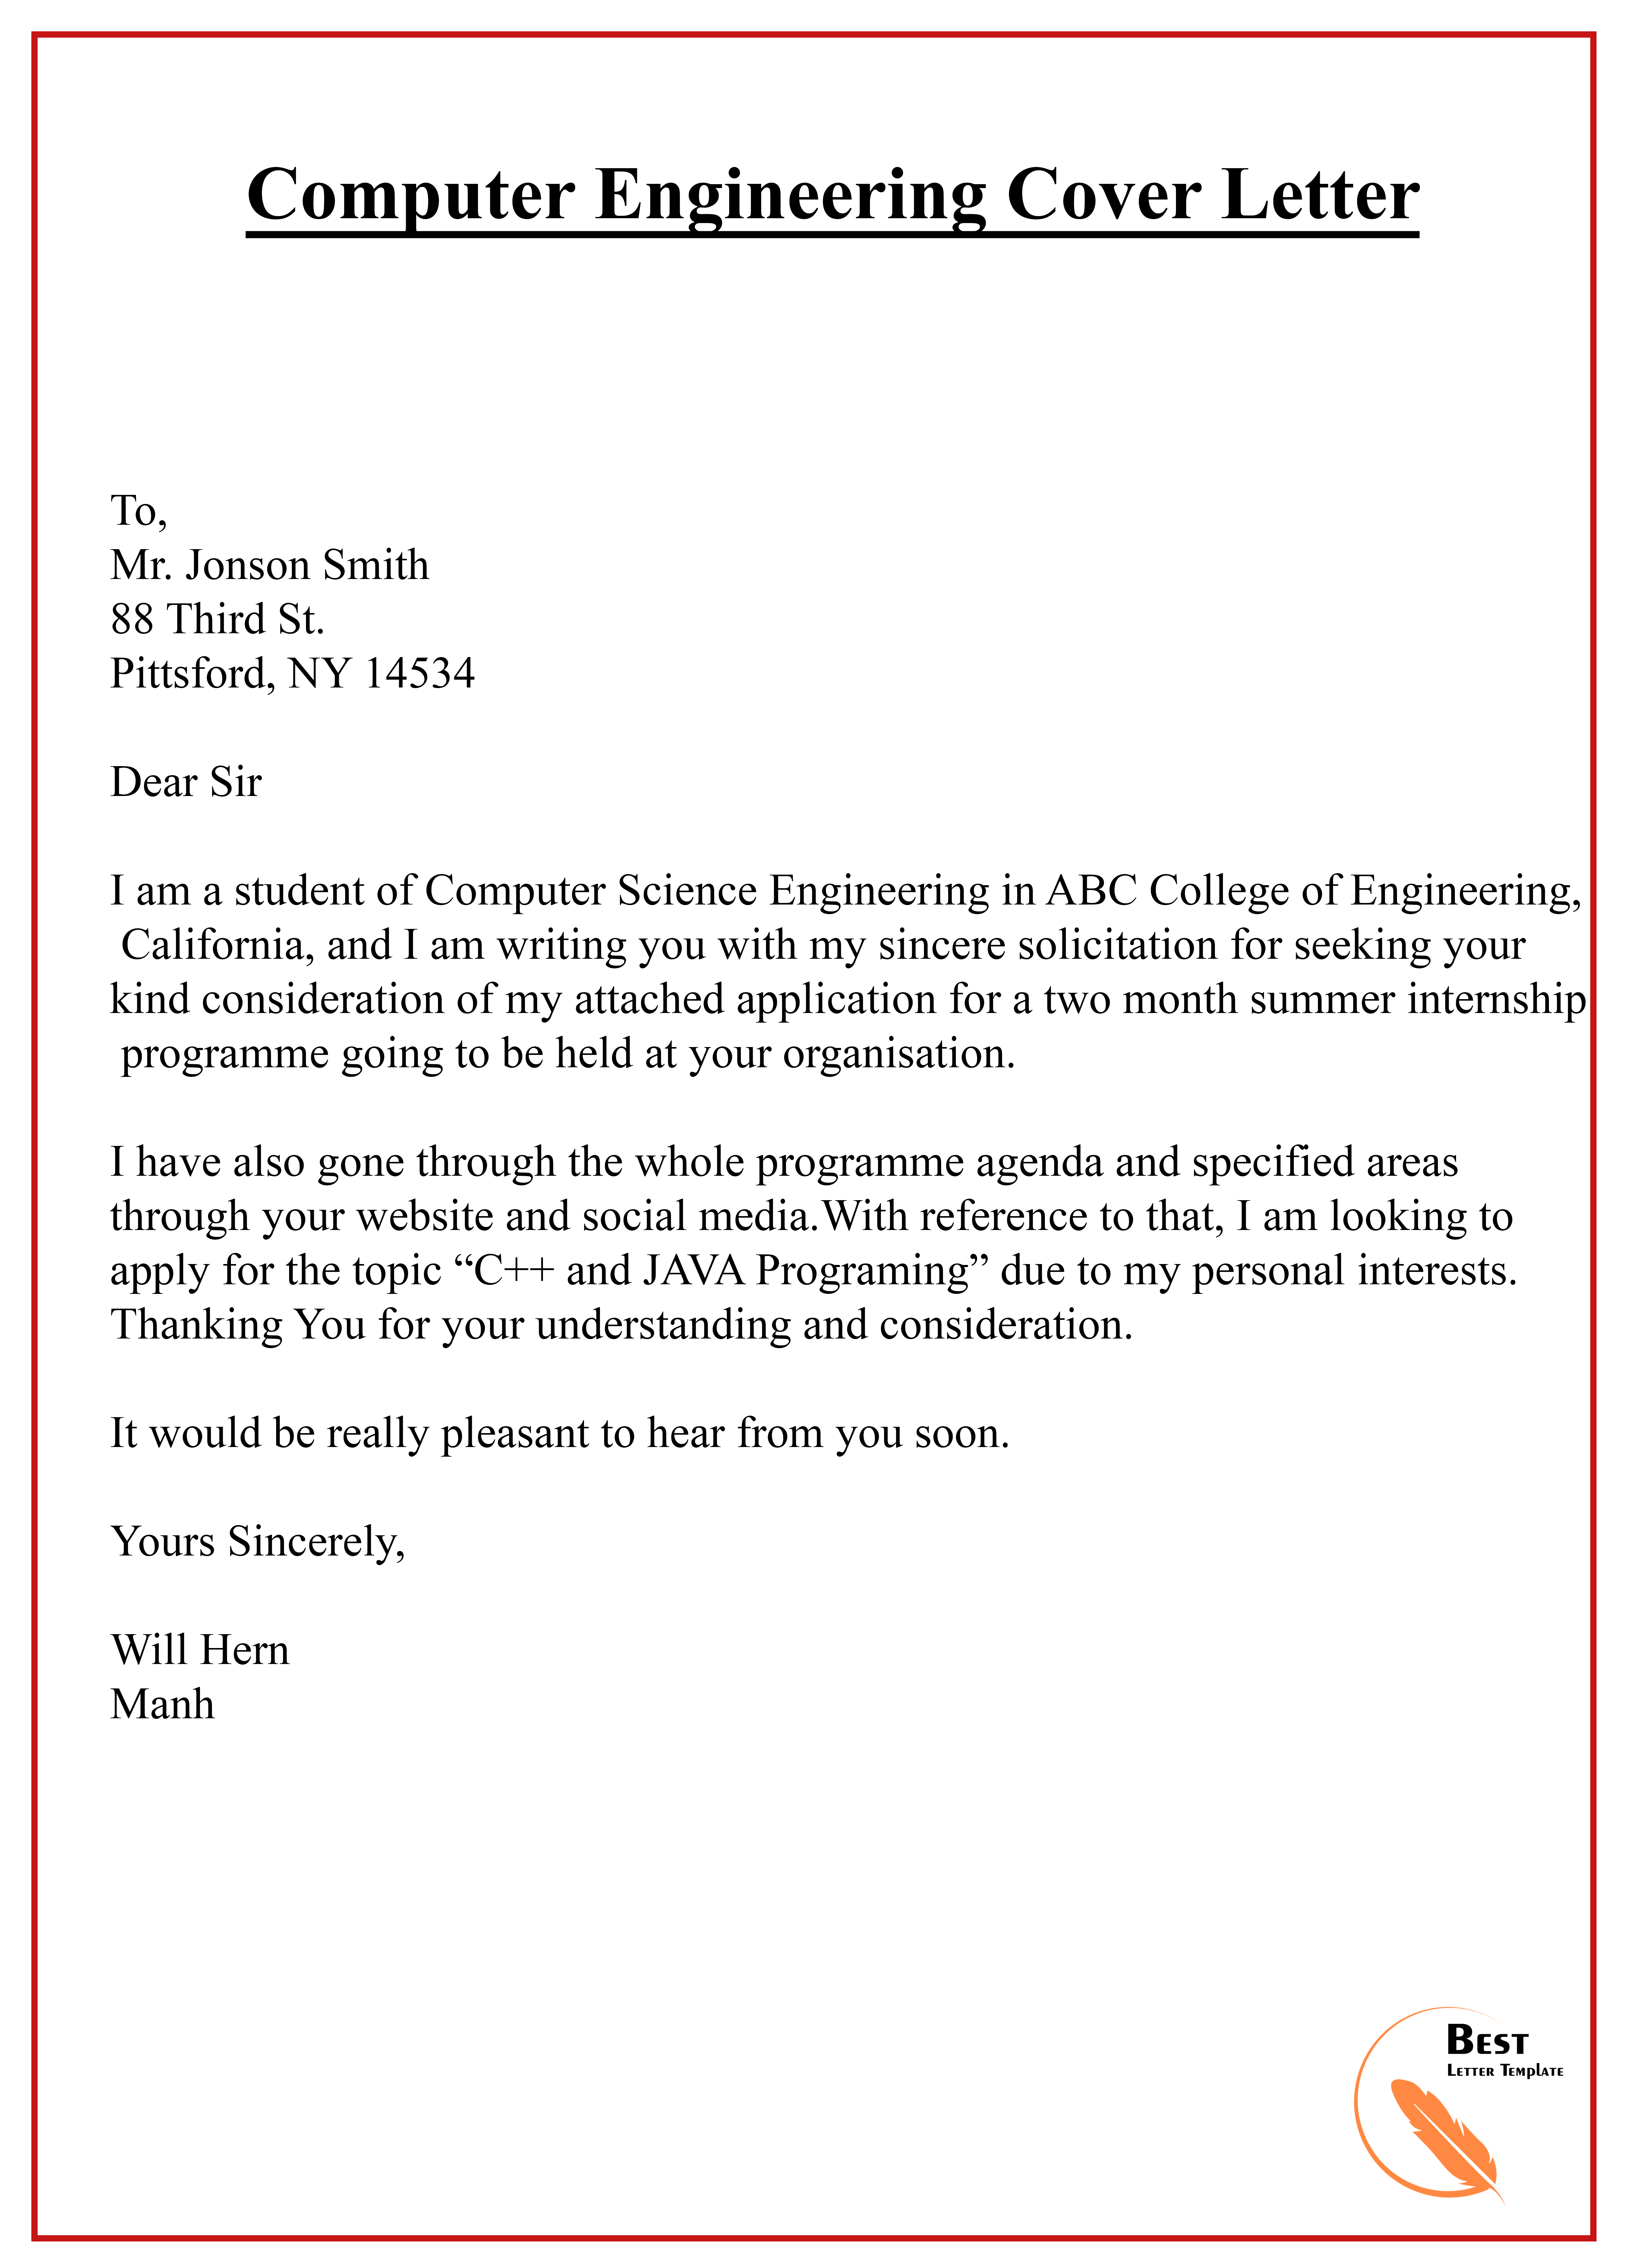 Engineering Cover Letter Template - Format Sample ...